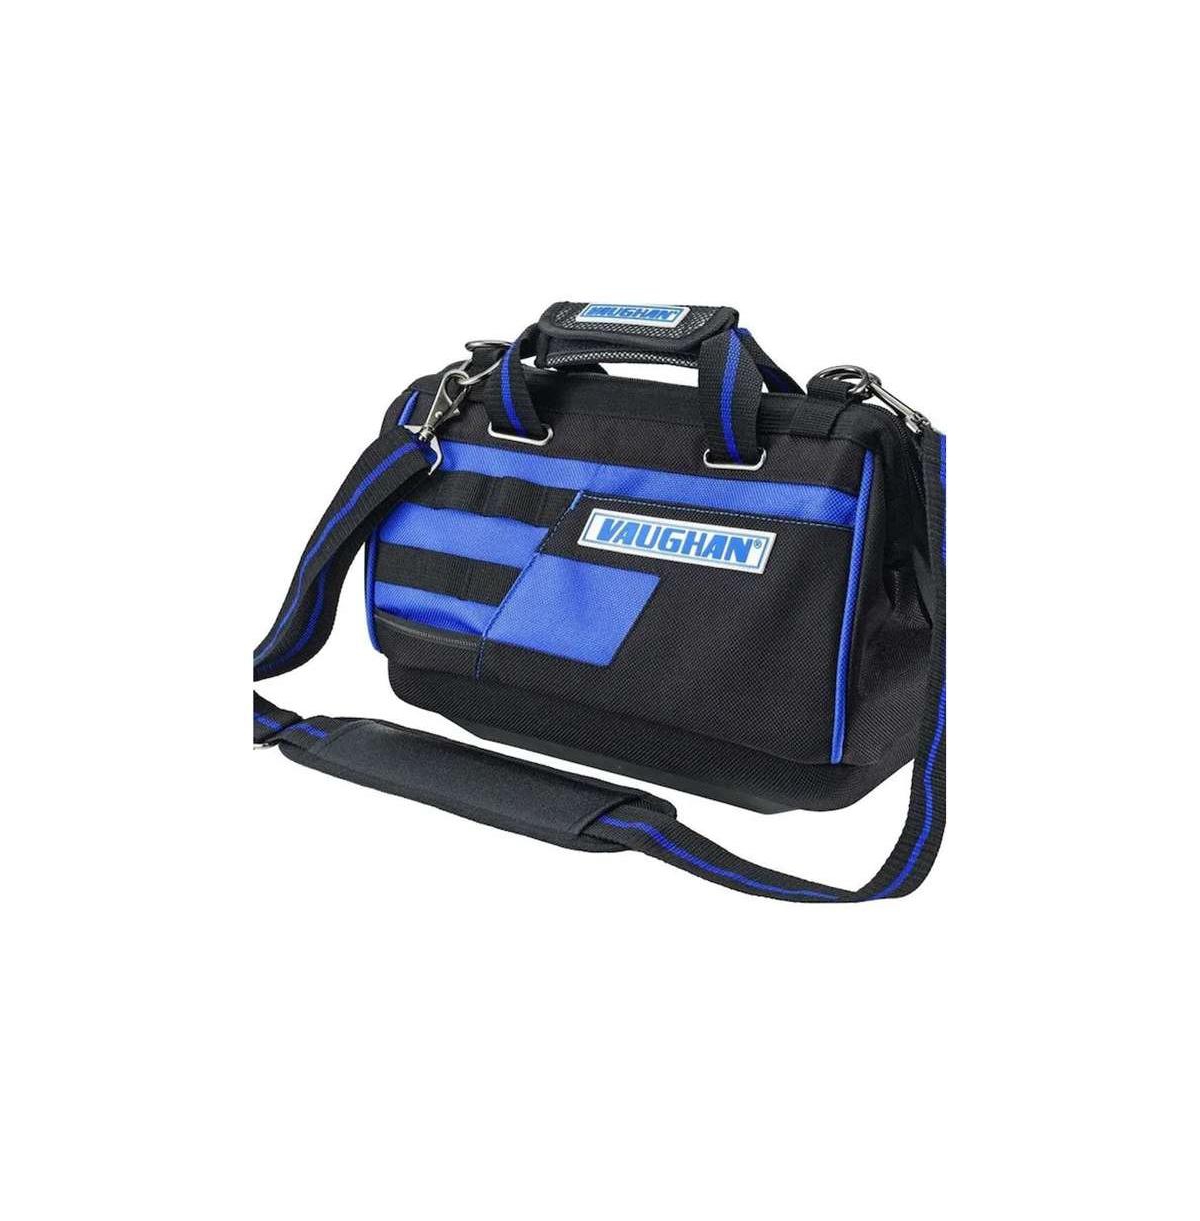 13 Inch Wide Mouth Blue and Black Tool Bag - Blue